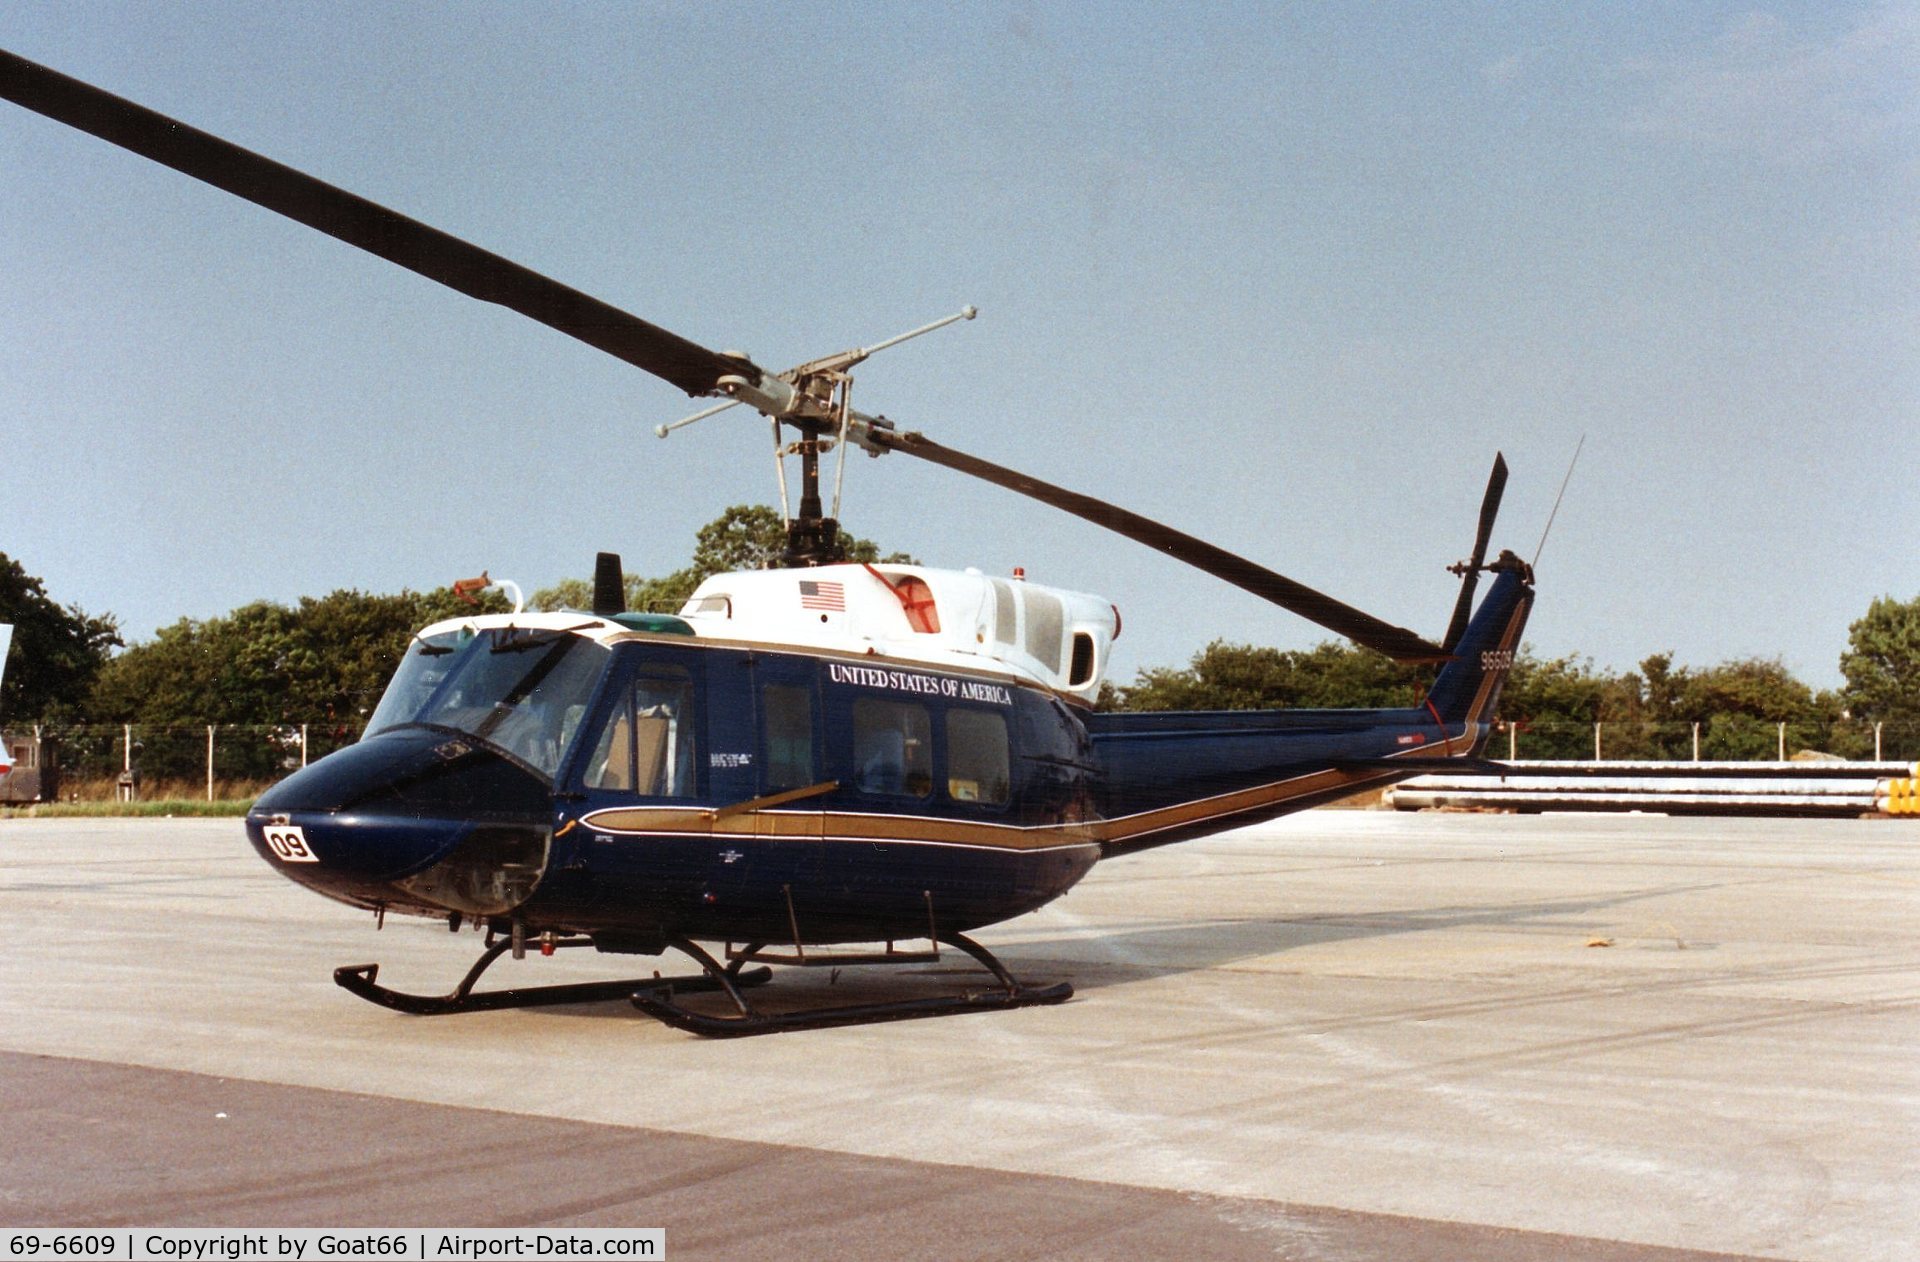 69-6609, 1969 Bell UH-1N Iroquois C/N 31015, RAF Fairford for IAT July 1989, one of several visits to this event